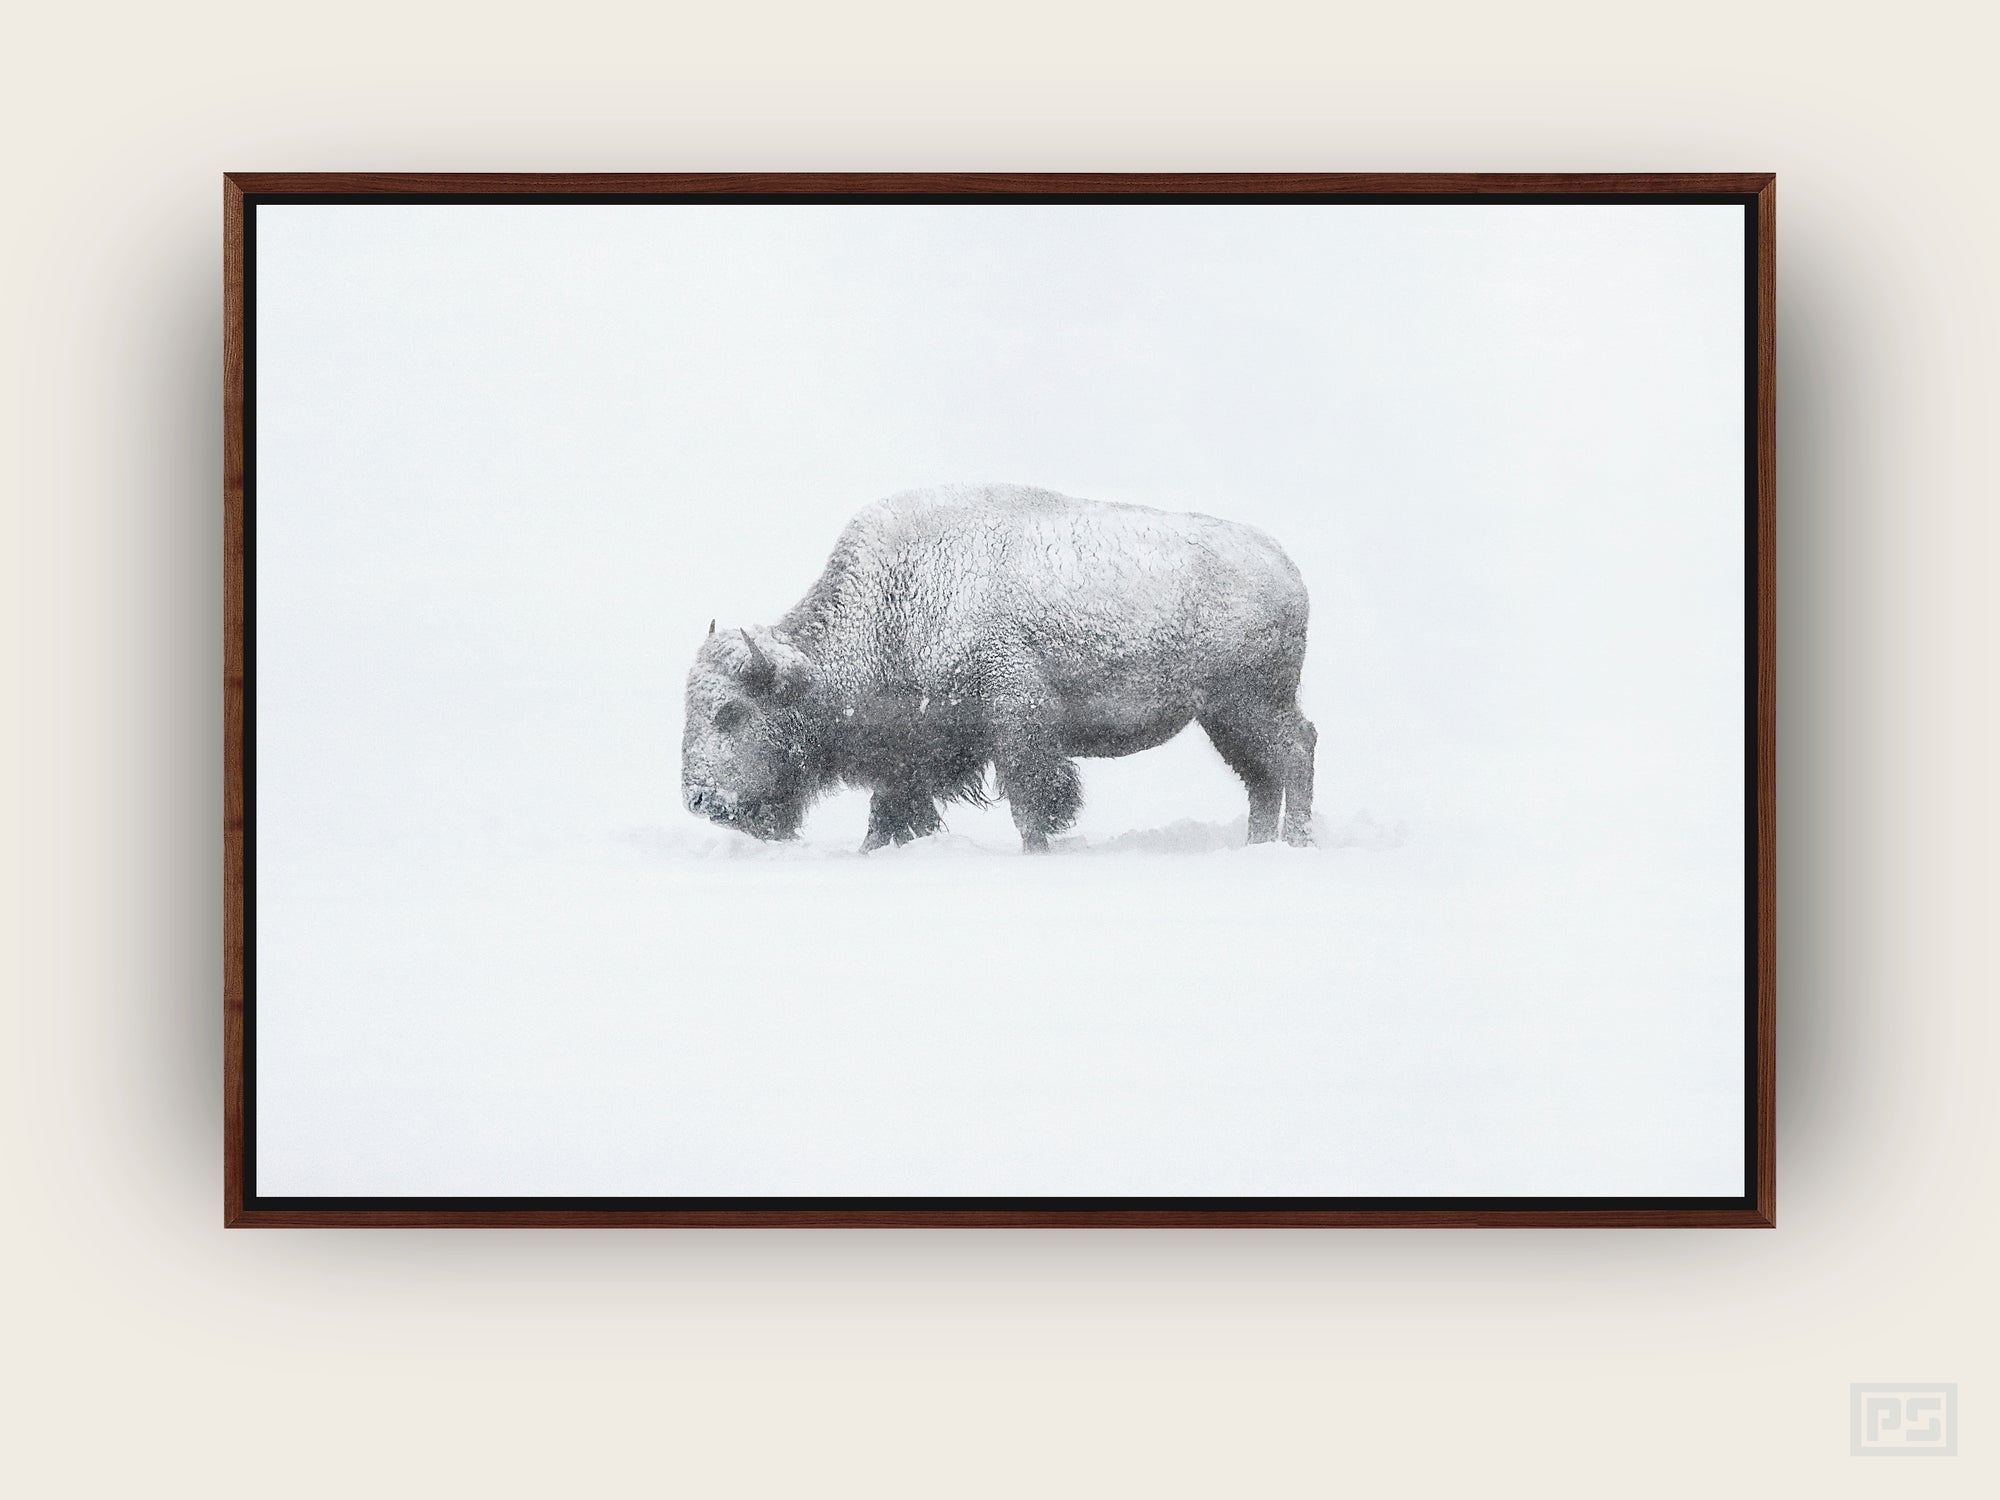 Framed Canvas Print "The American Bison"